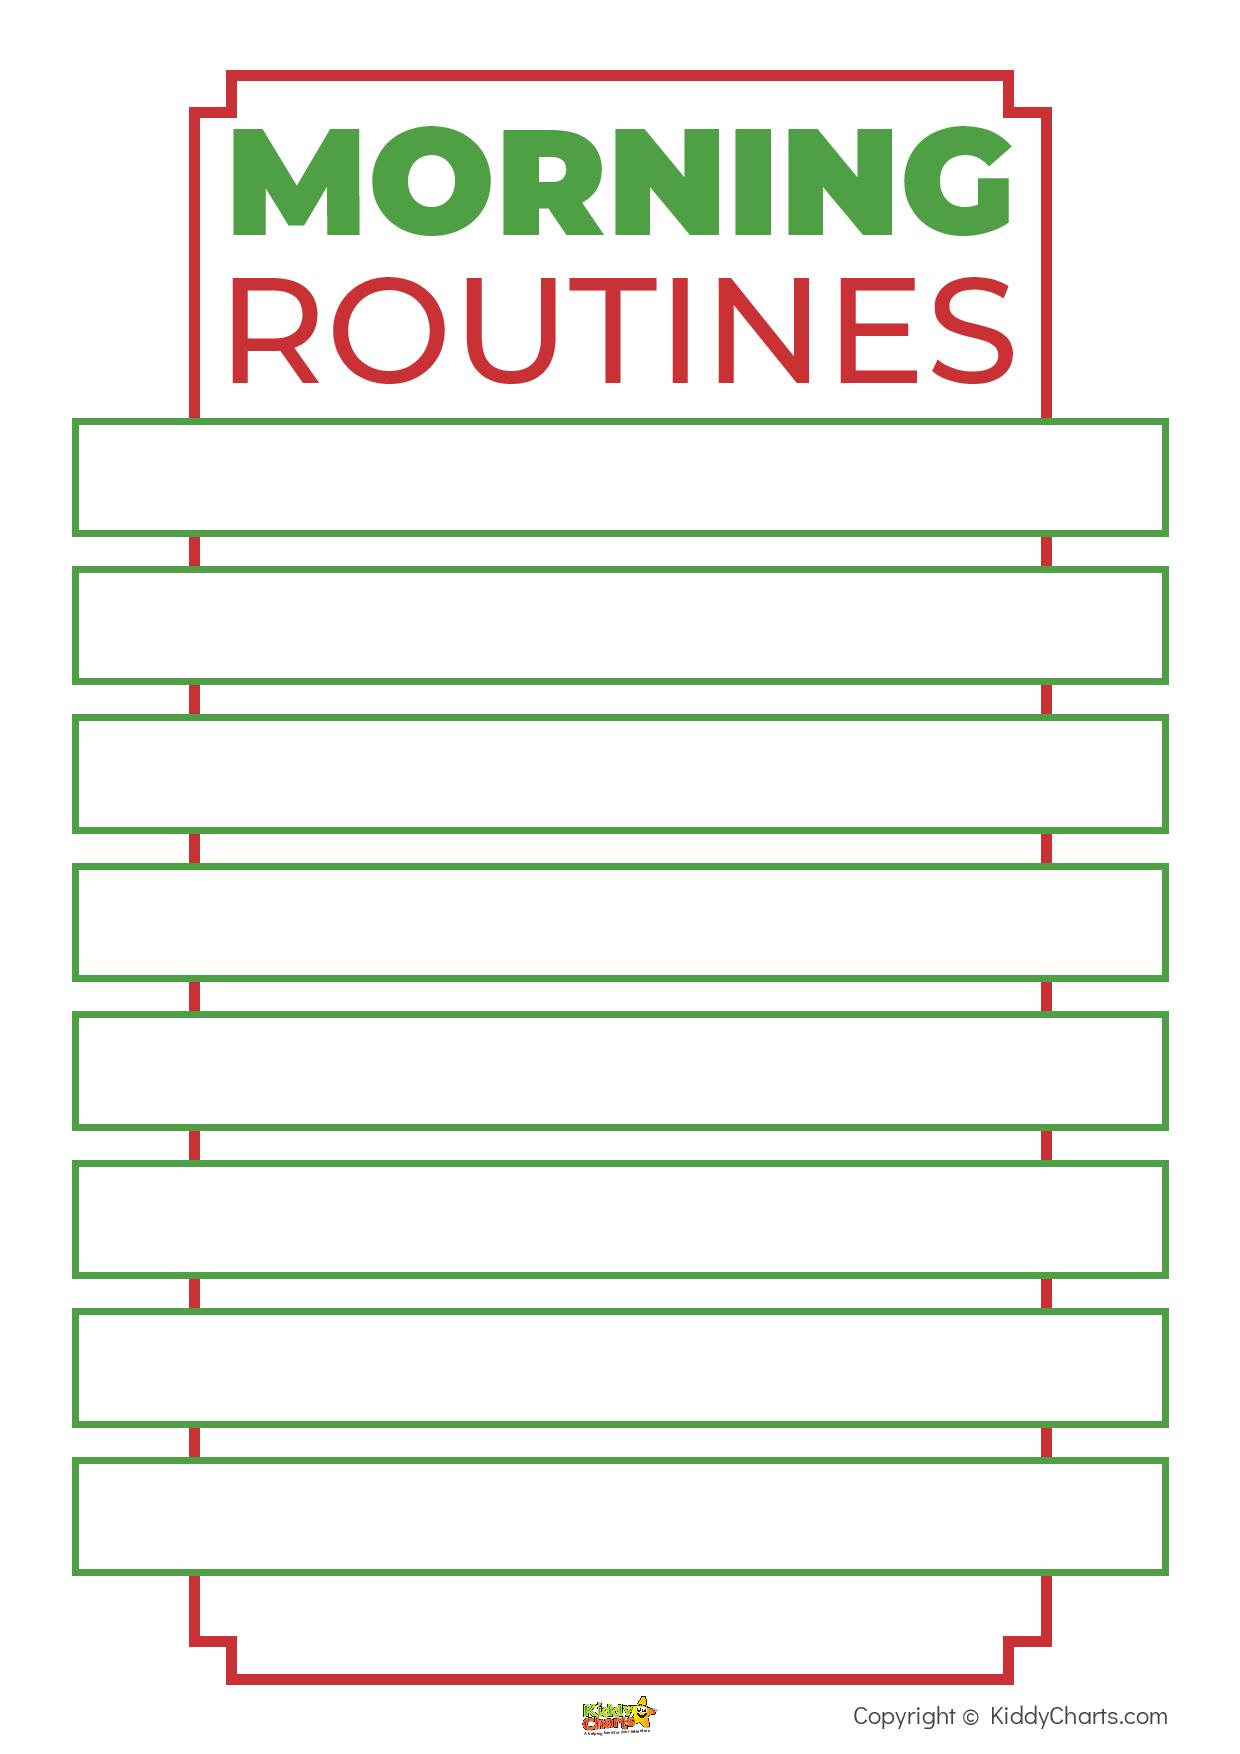 Morning Routine Chart Personalised for You